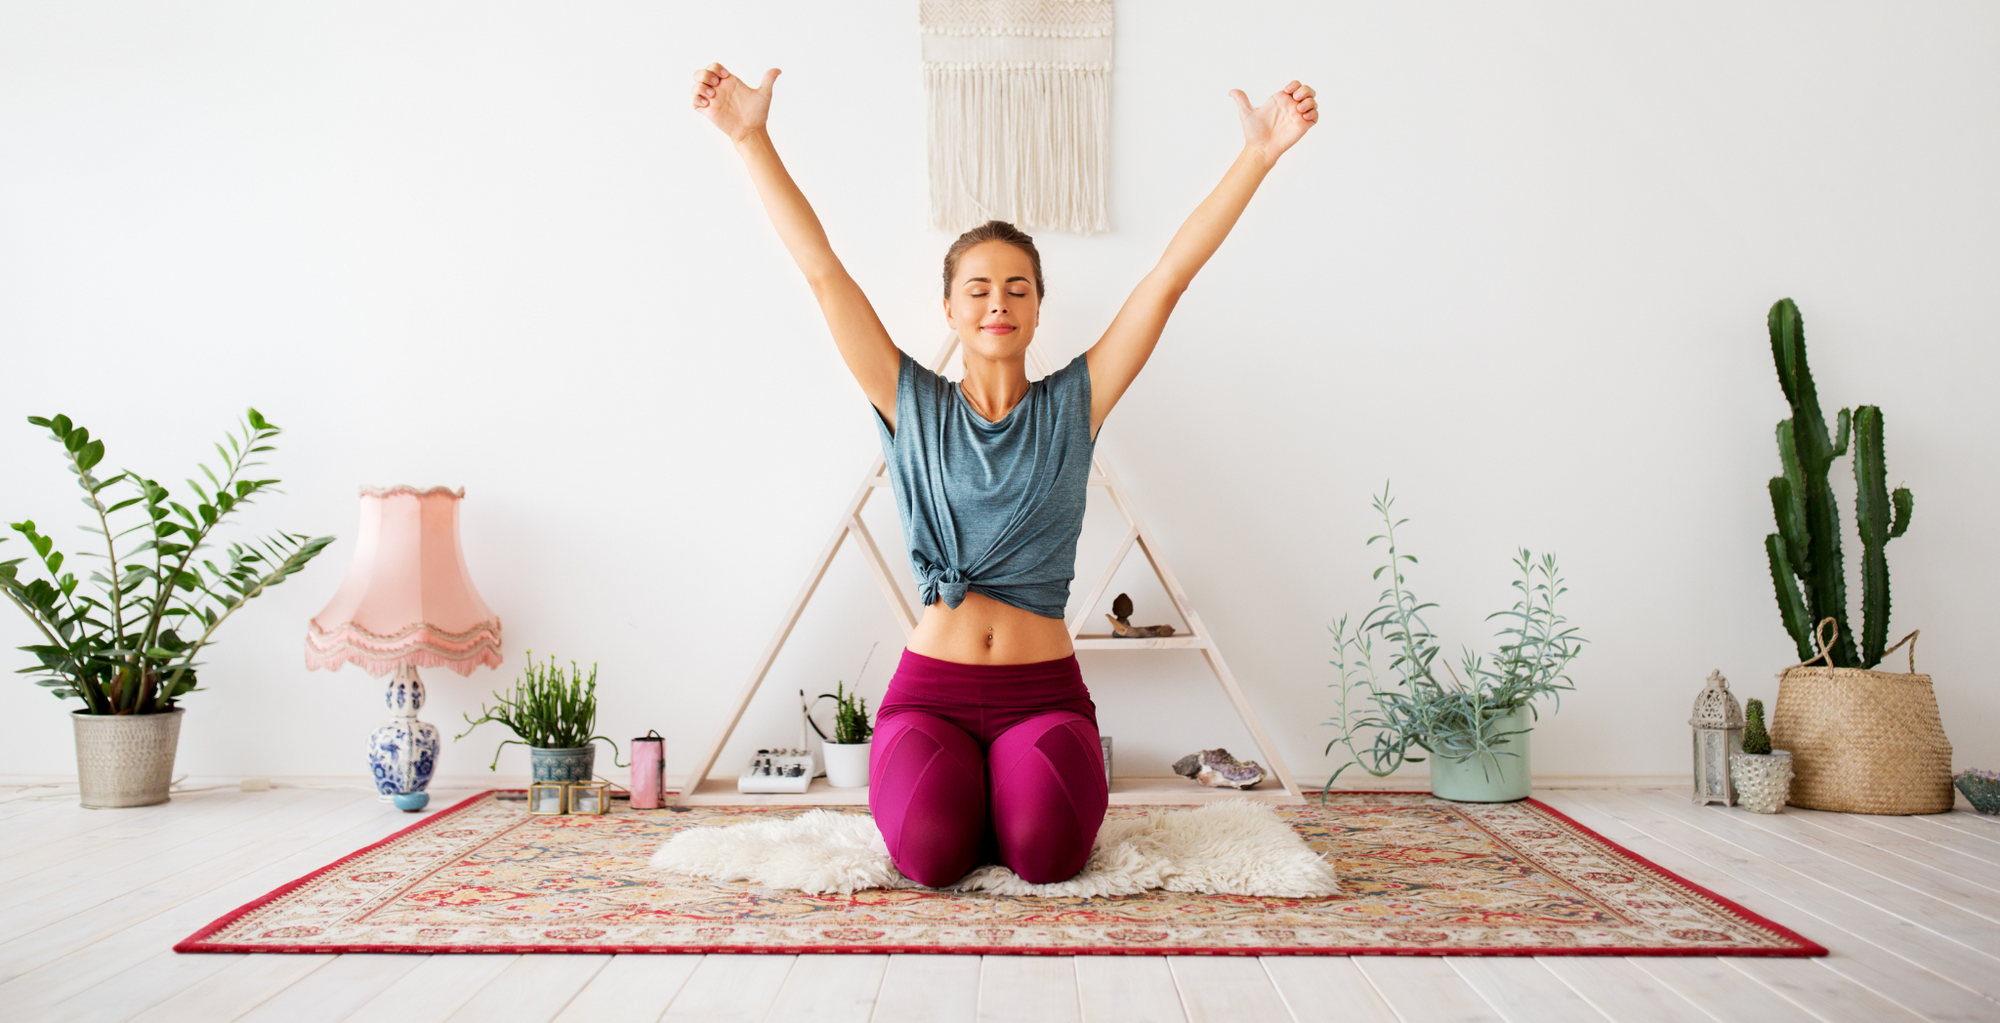 Yoga and Digestive Health: Poses for a Happy Gut